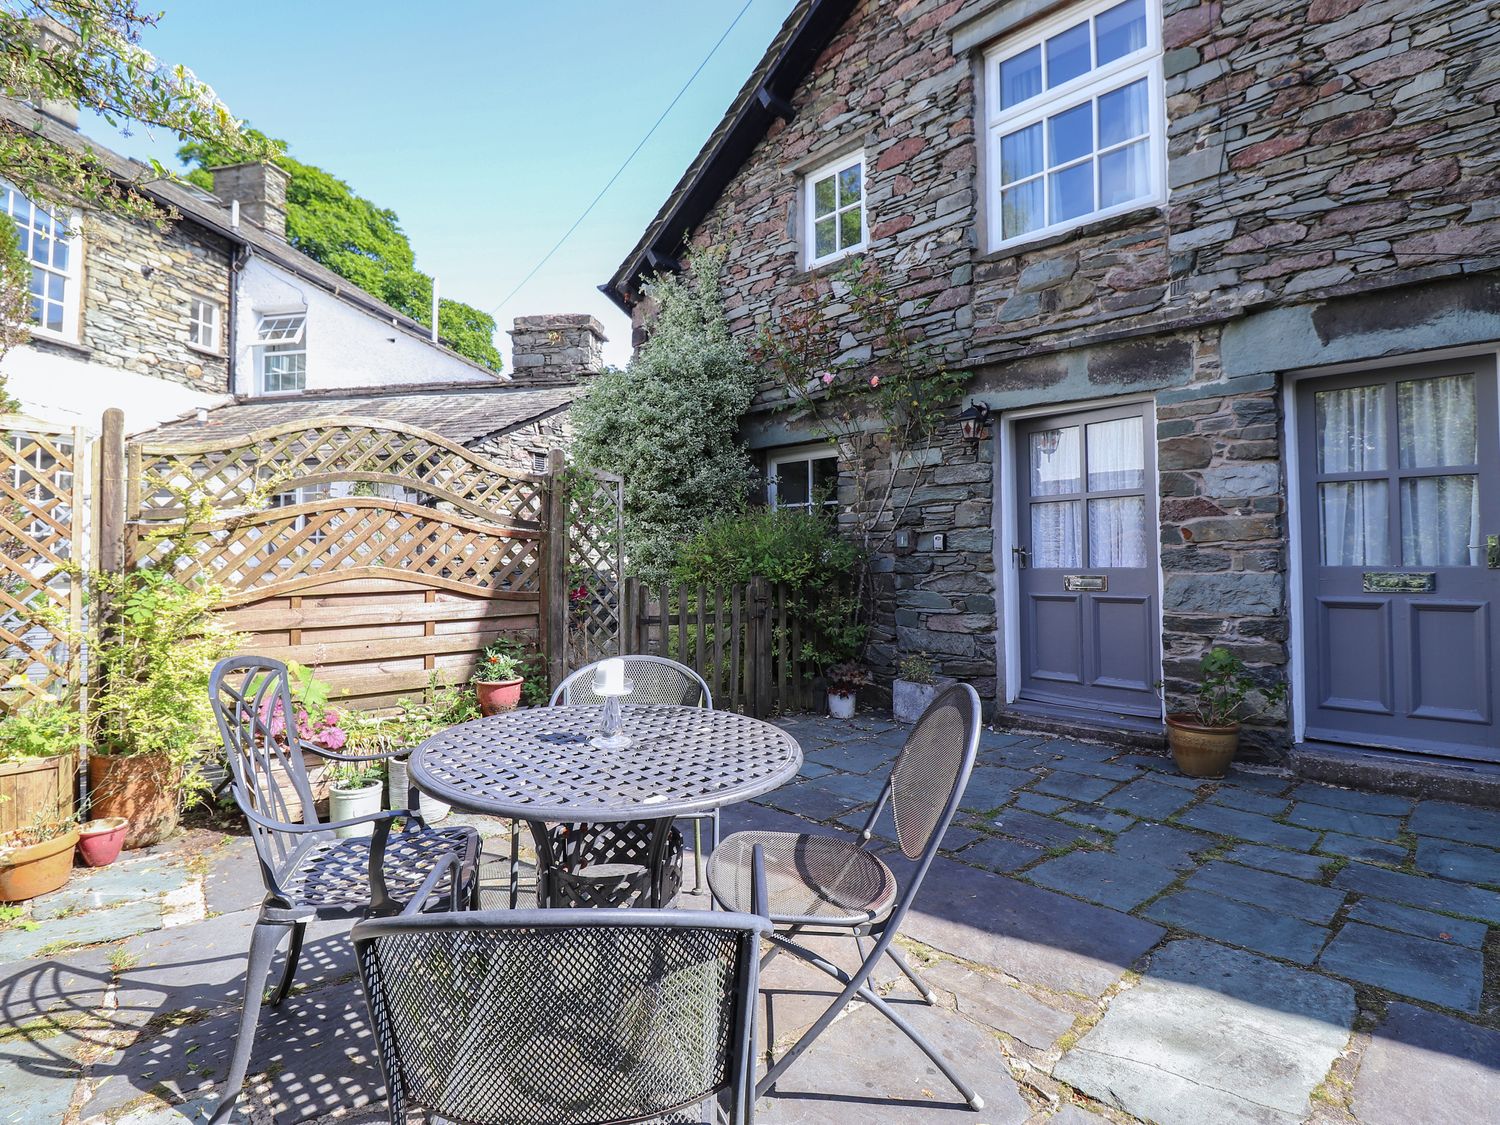 Bakers Yard Cottage - Lake District - 1132723 - photo 1